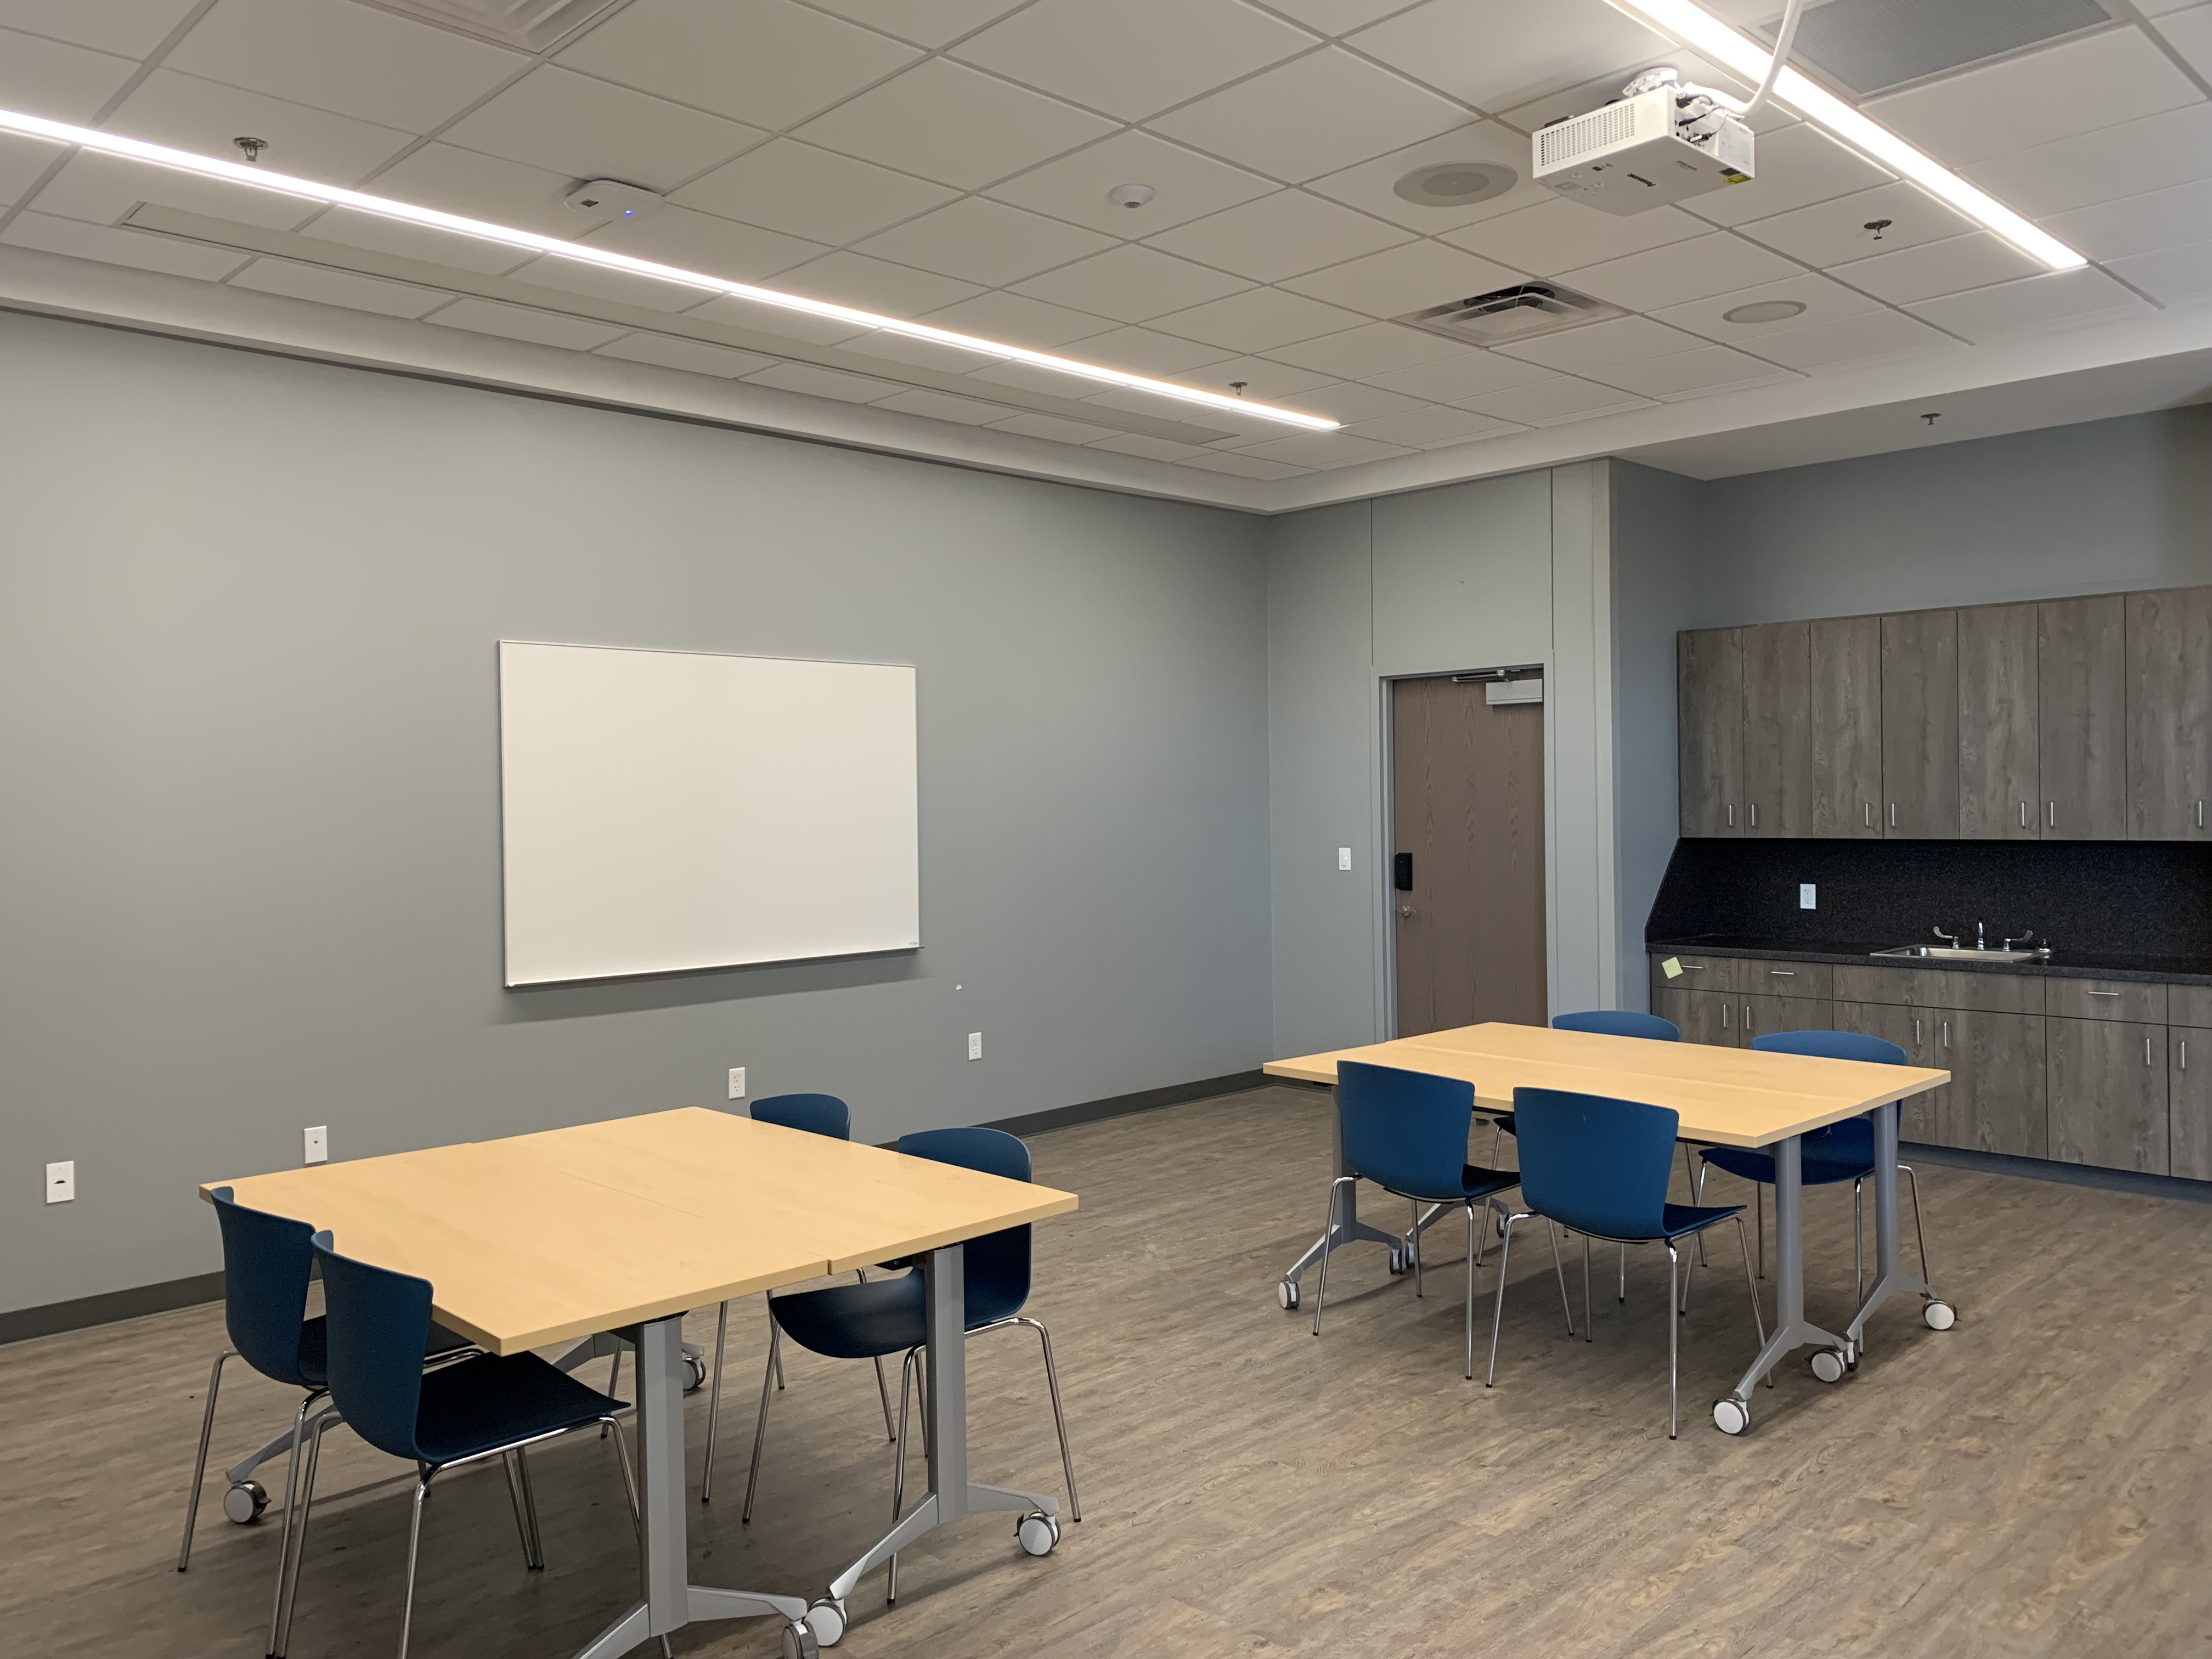 Meeting Room A at the Del City Library with rectangular tables and chairs